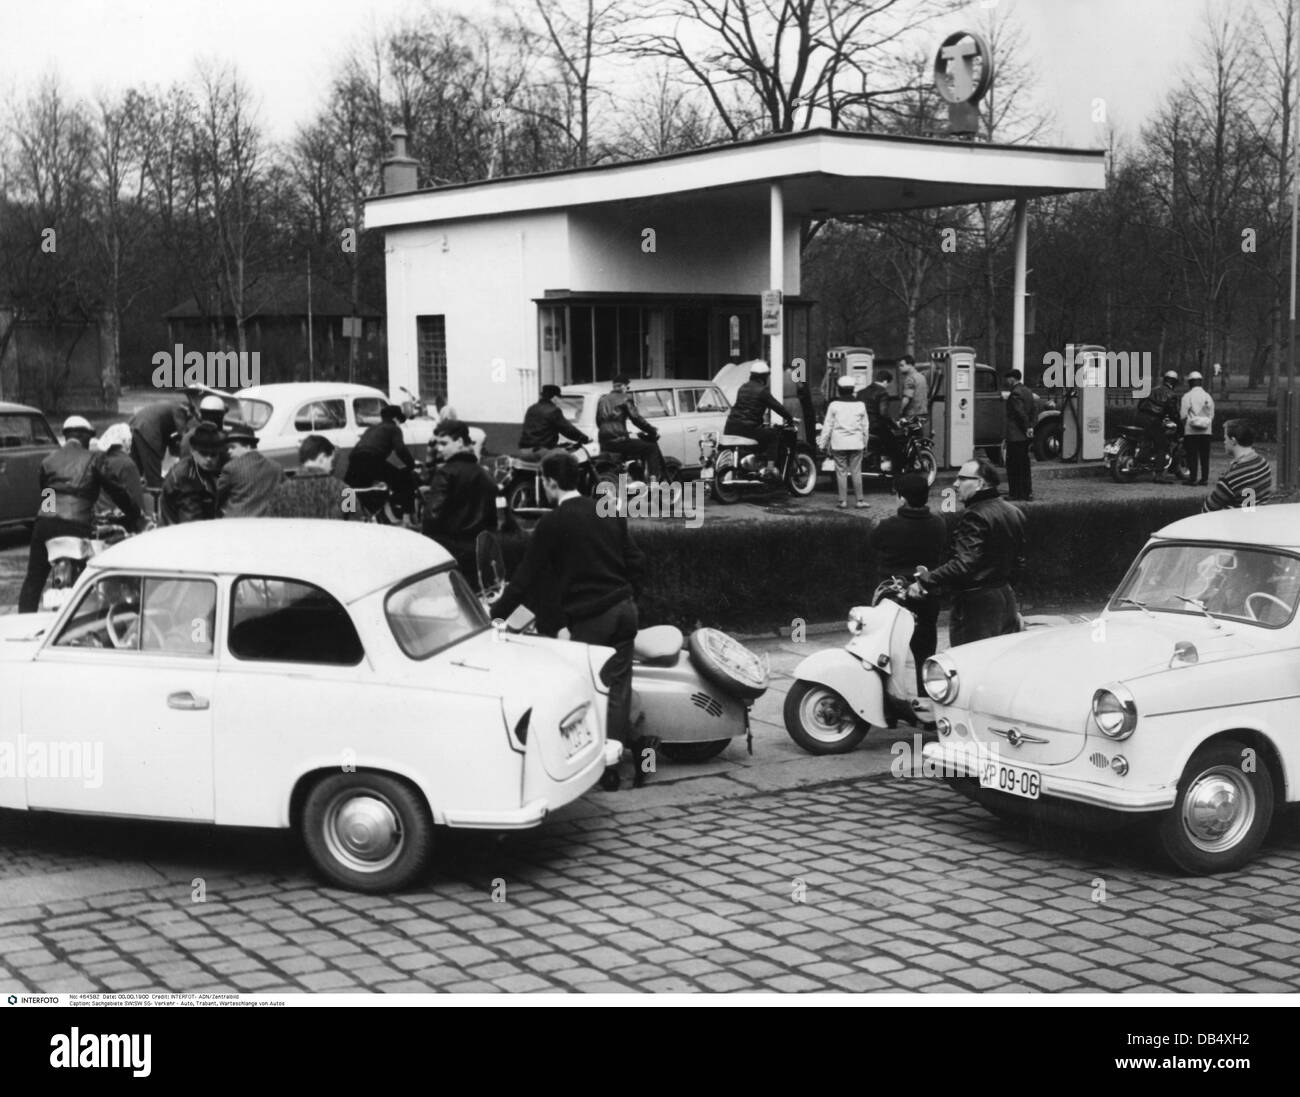 transport / transportation, car, petrol station, waiting line of cars and motorcycles in front of of a petrol station, district Karl-Marx-Stadt, East-Germany, 17.4.1963, Additional-Rights-Clearences-Not Available Stock Photo